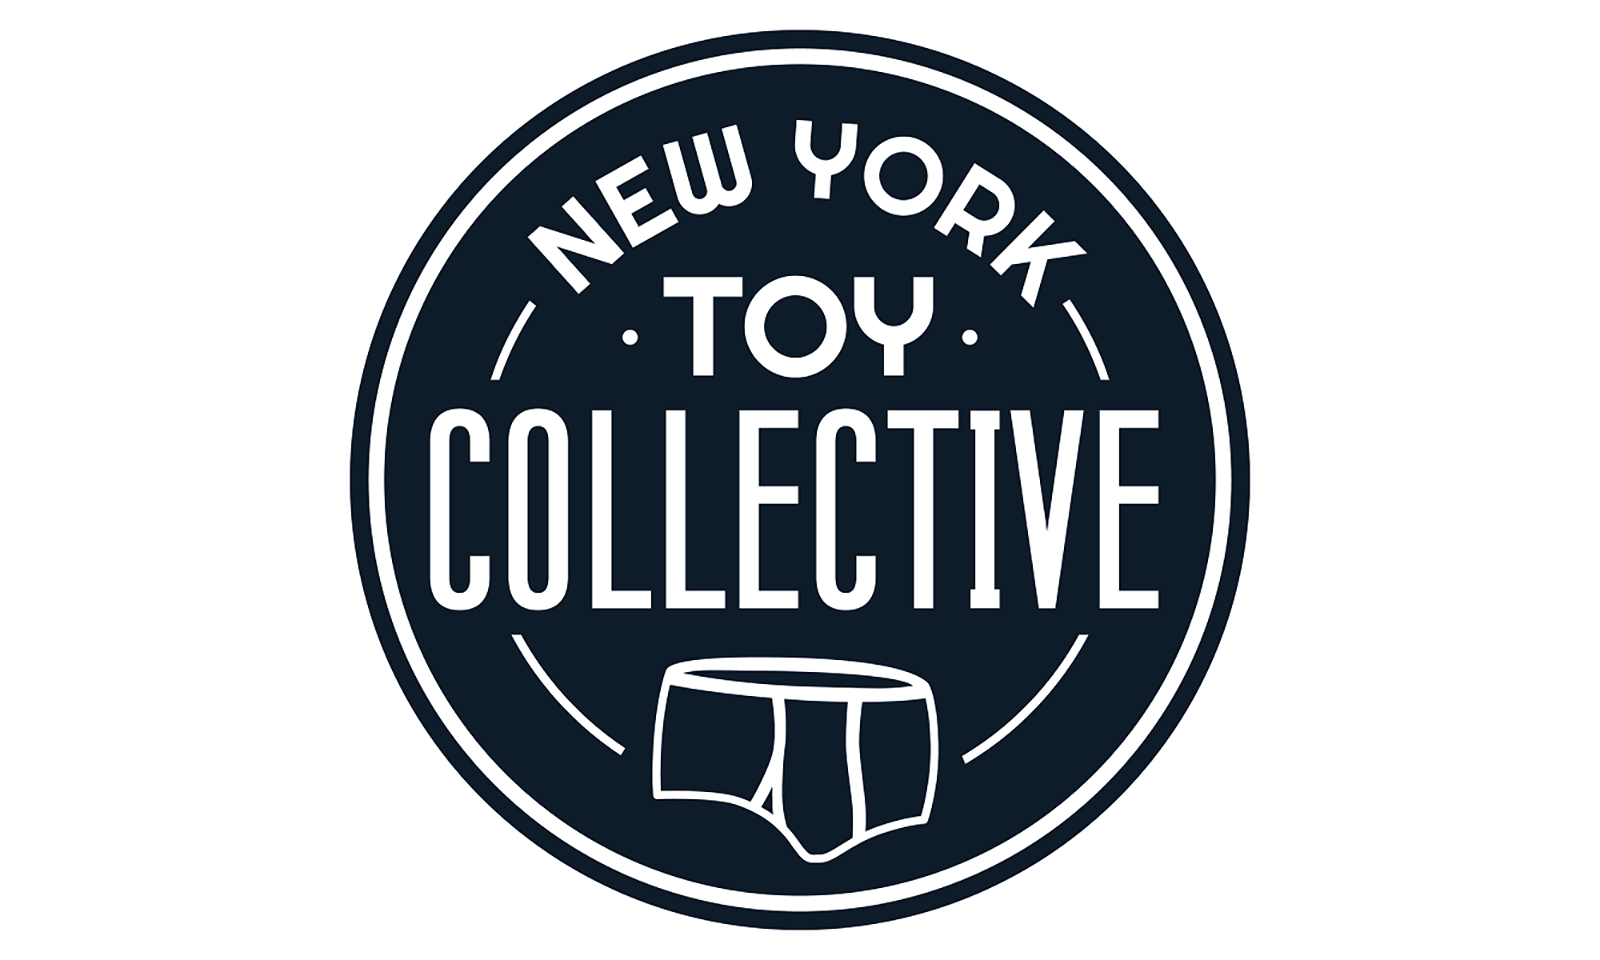 New York Toy Collective Offers New Trans Masc Pump Deluxe